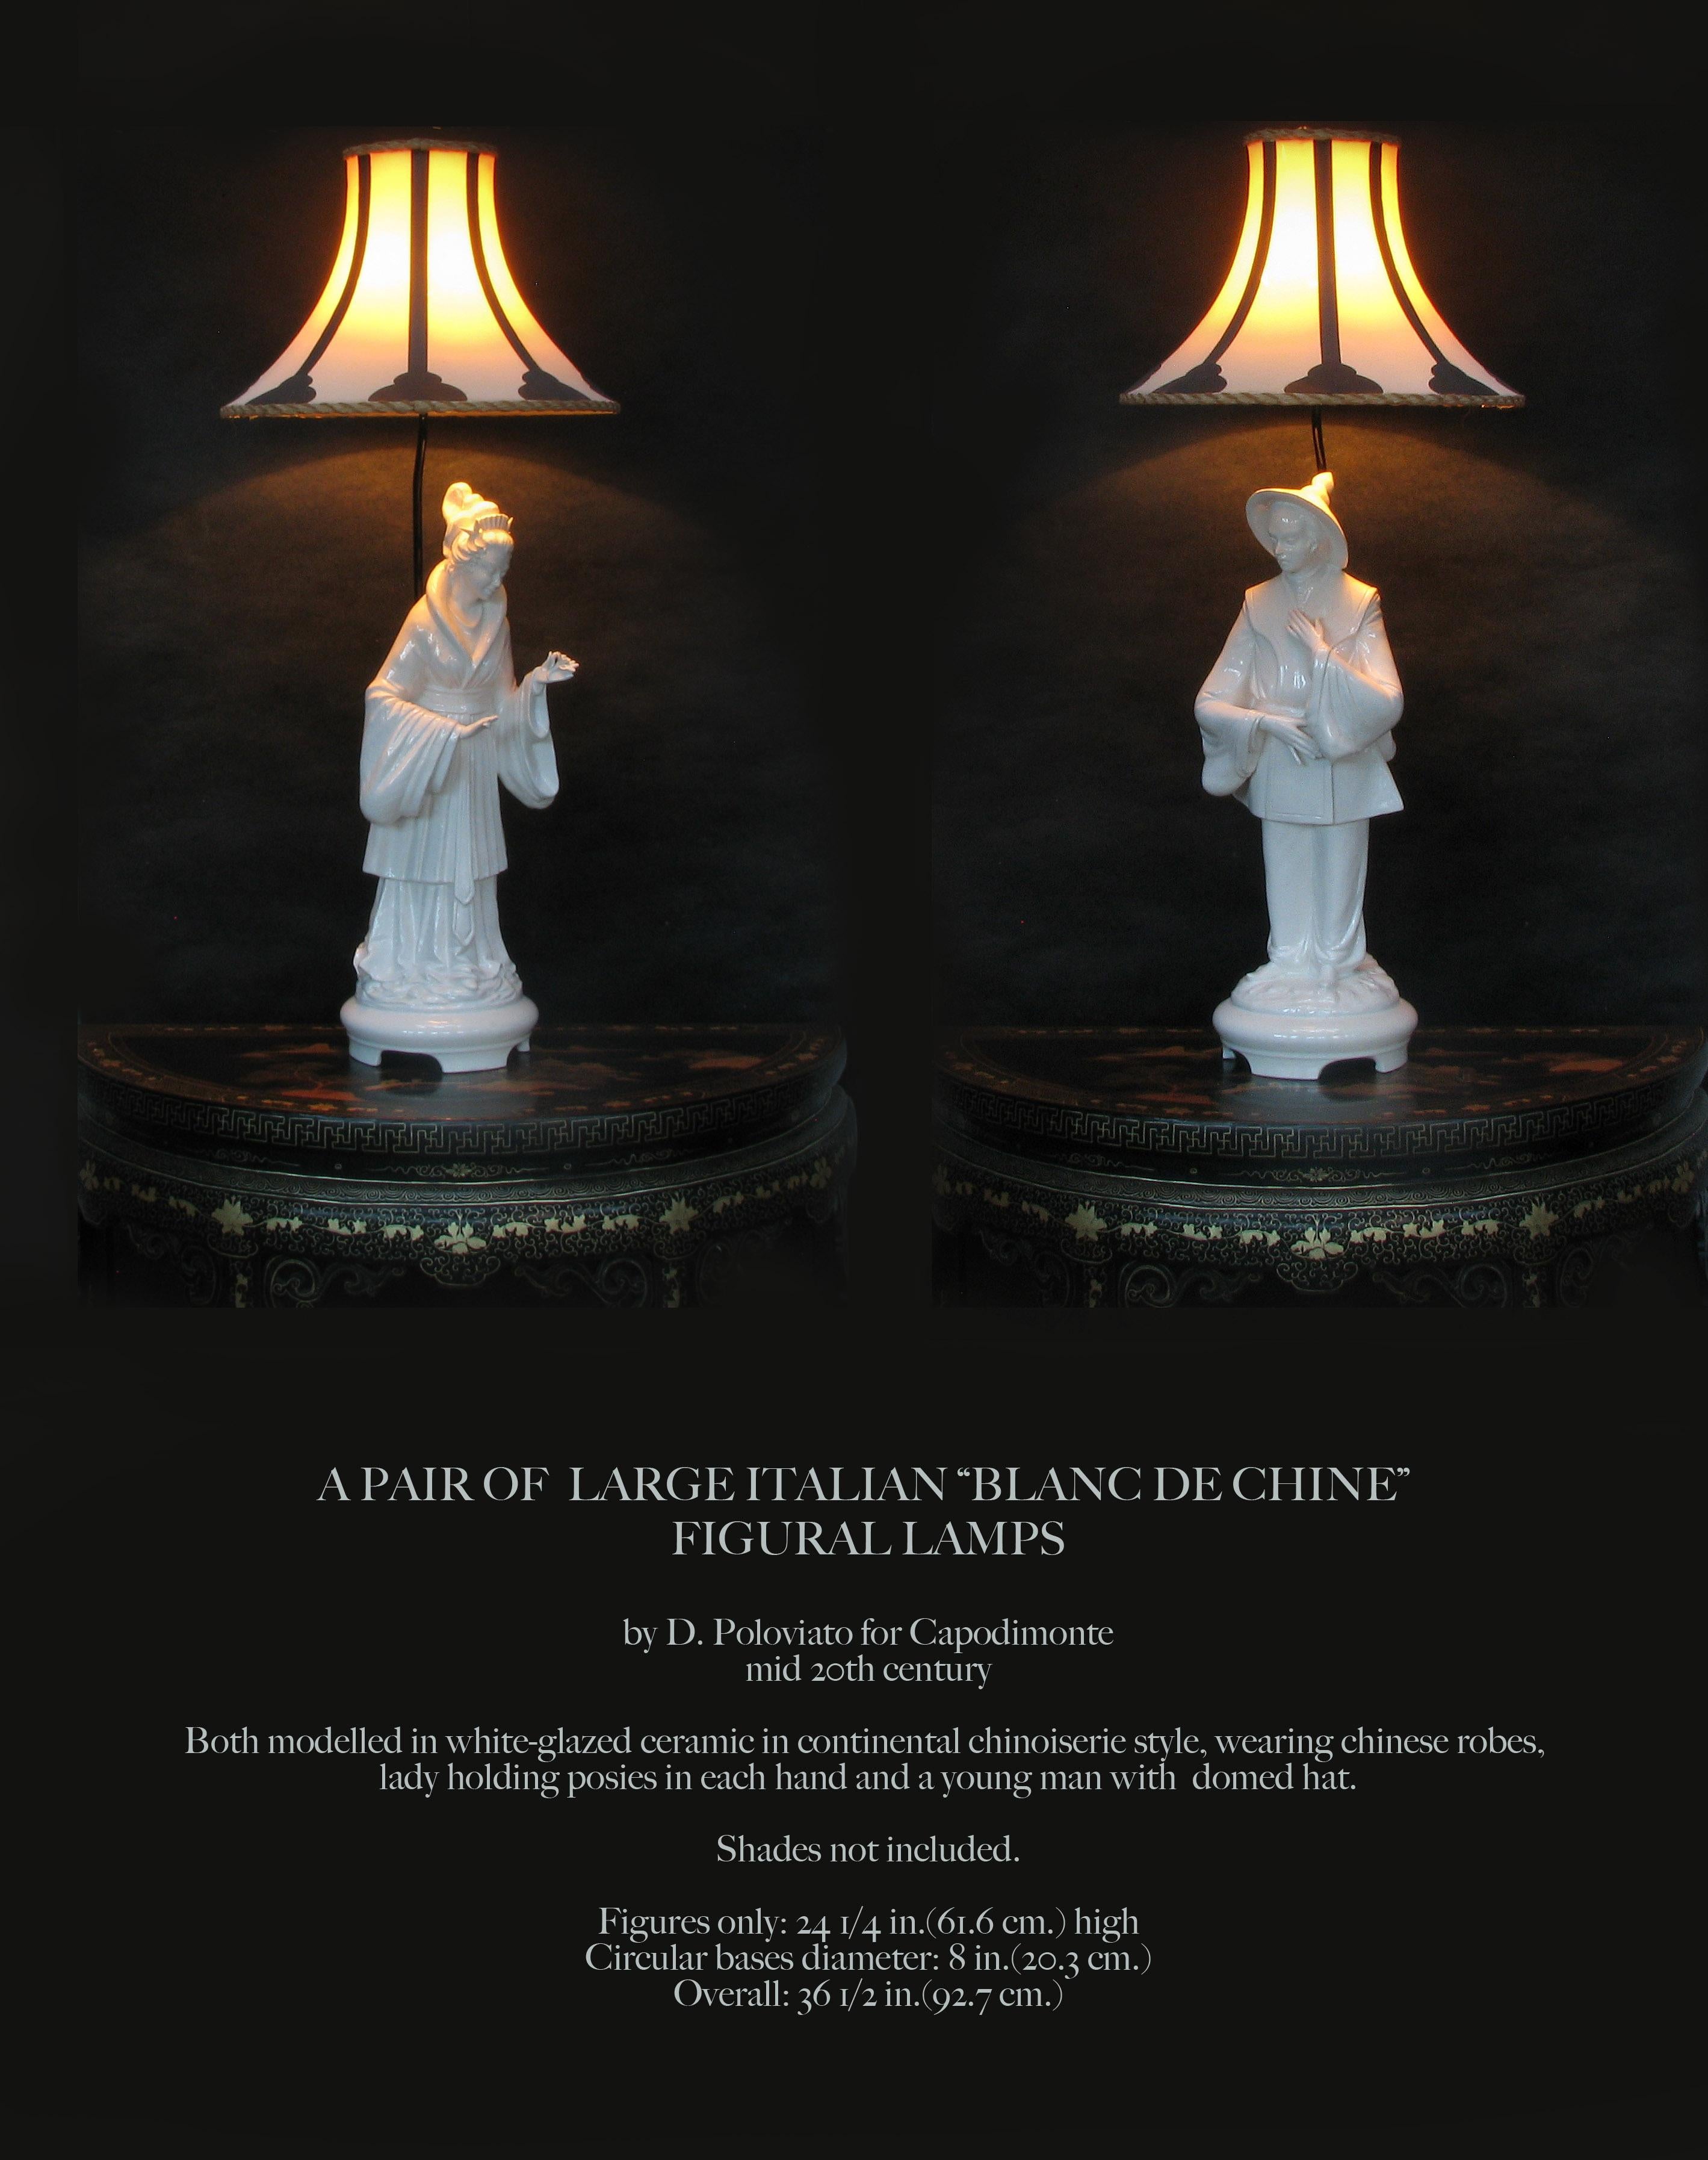 A pair of large Italian “BLANC DE CHINE”
Figural lamps

By D. Poloviato for Capodimonte
Mid 20th century.

Both modelled in white-glazed ceramic in continental chinoiserie style, wearing chinese robes, 
lady holding posies in each hand and a